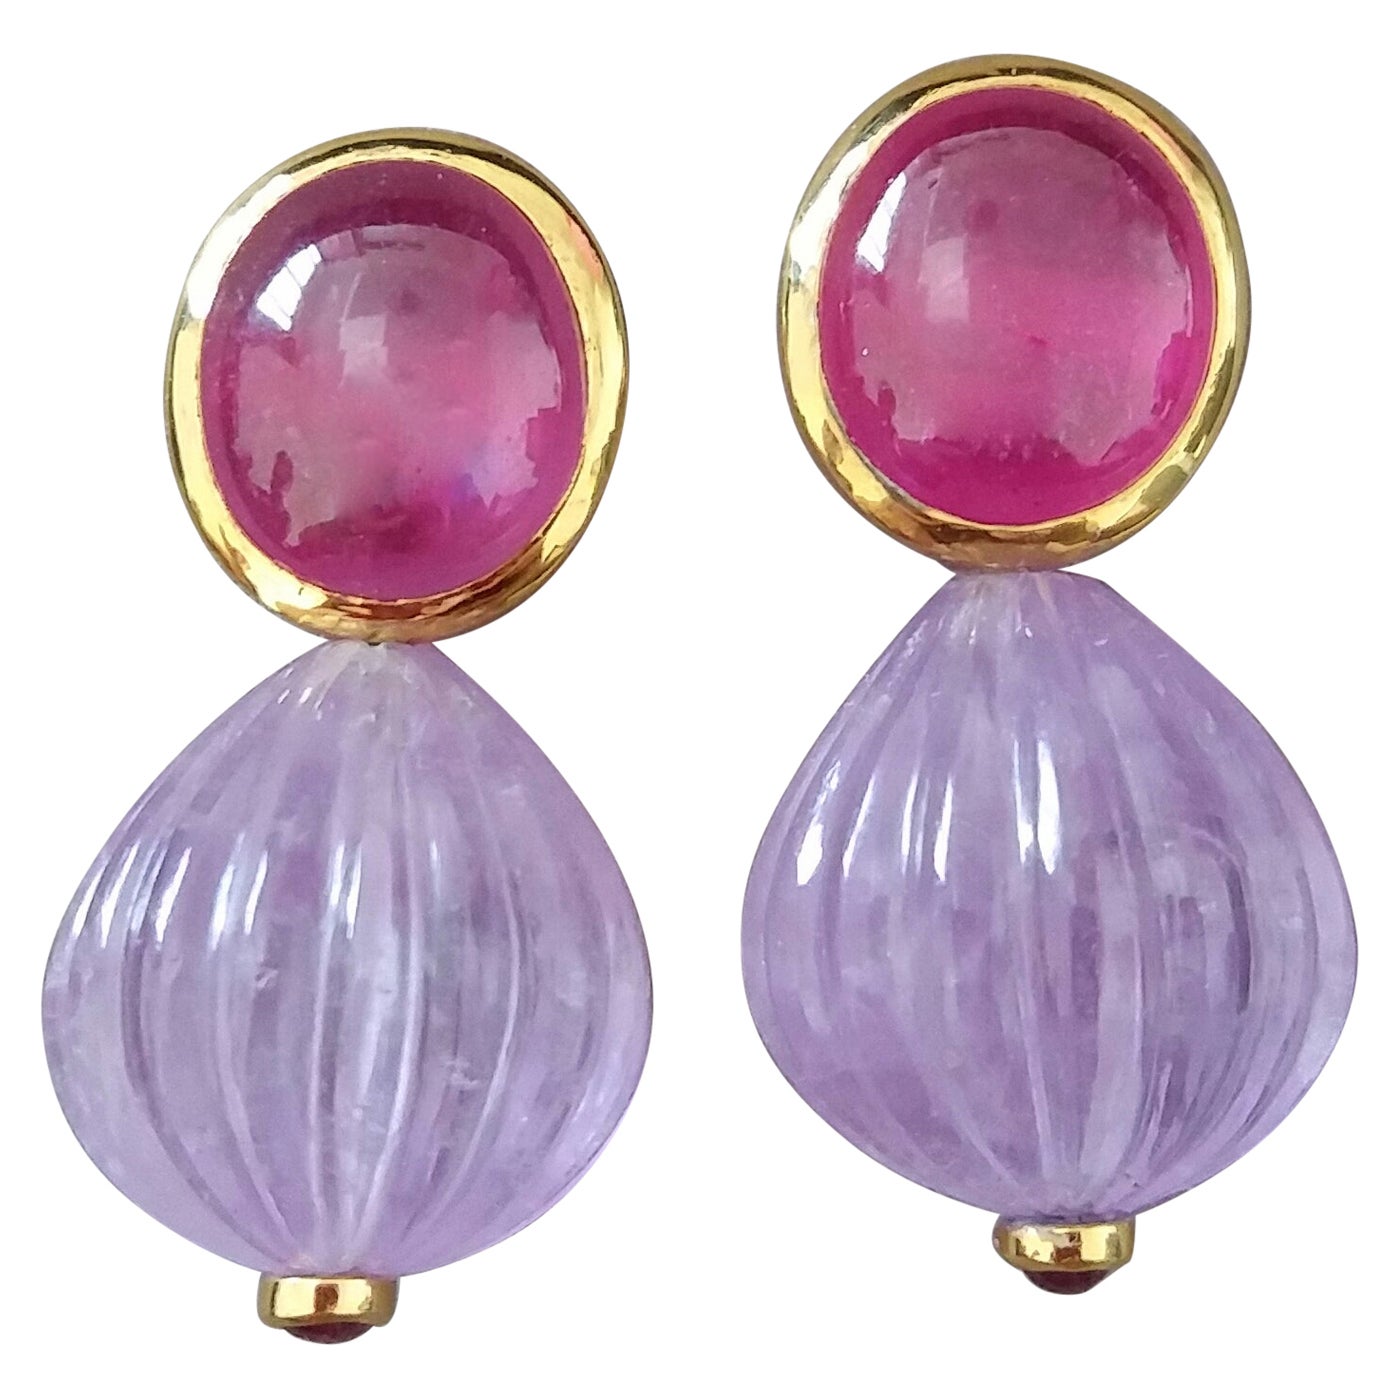 Oval Ruby Cabochons Yellow Gold Bezel Carved Amethyst Round Drops Stud Earrings